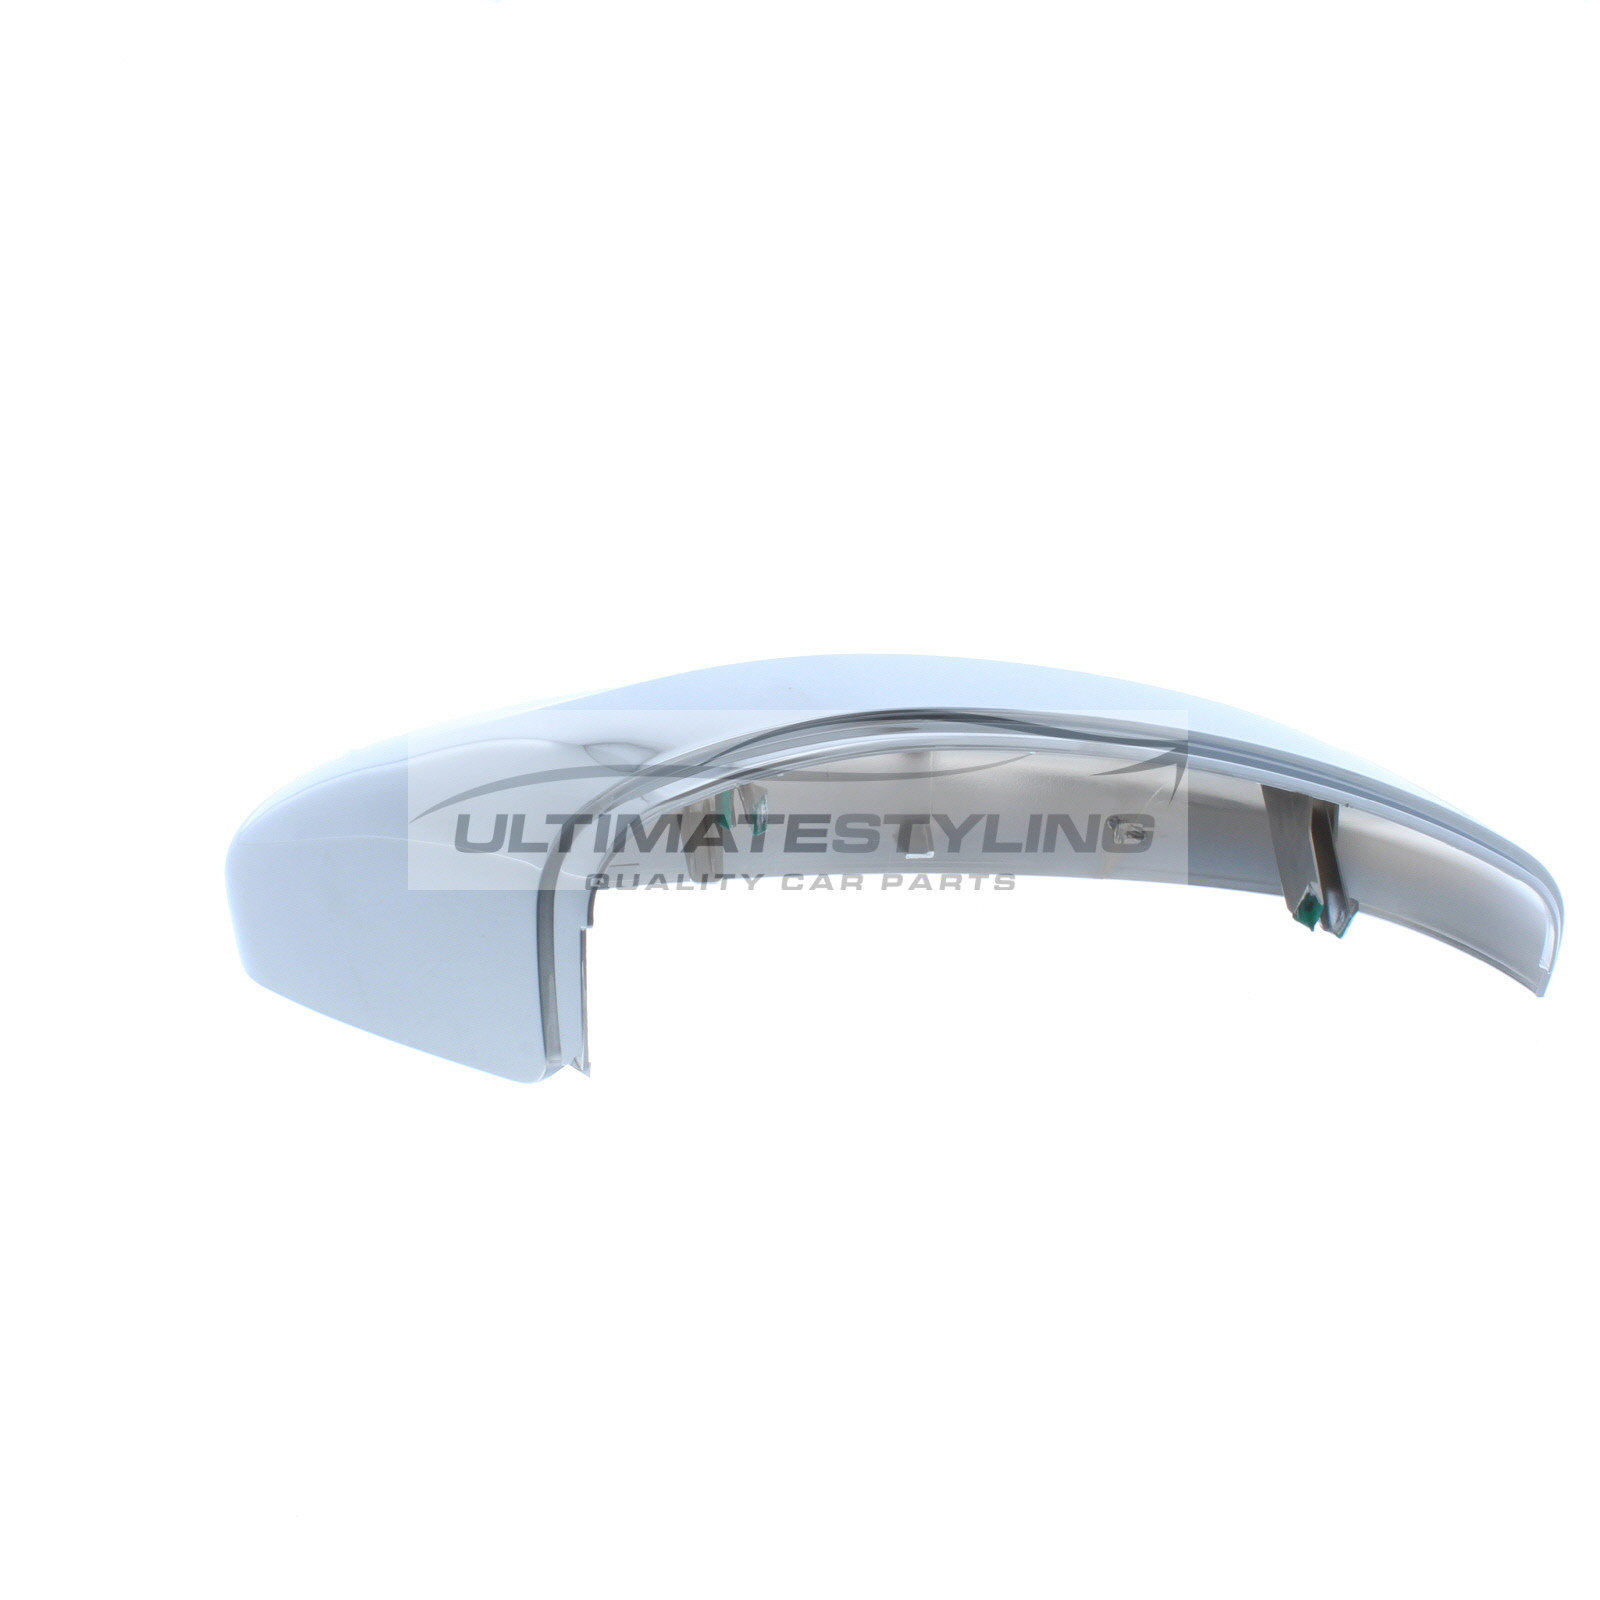 Peugeot 208 / 2008 Wing Mirror Cover - Drivers Side (RH) - Chrome